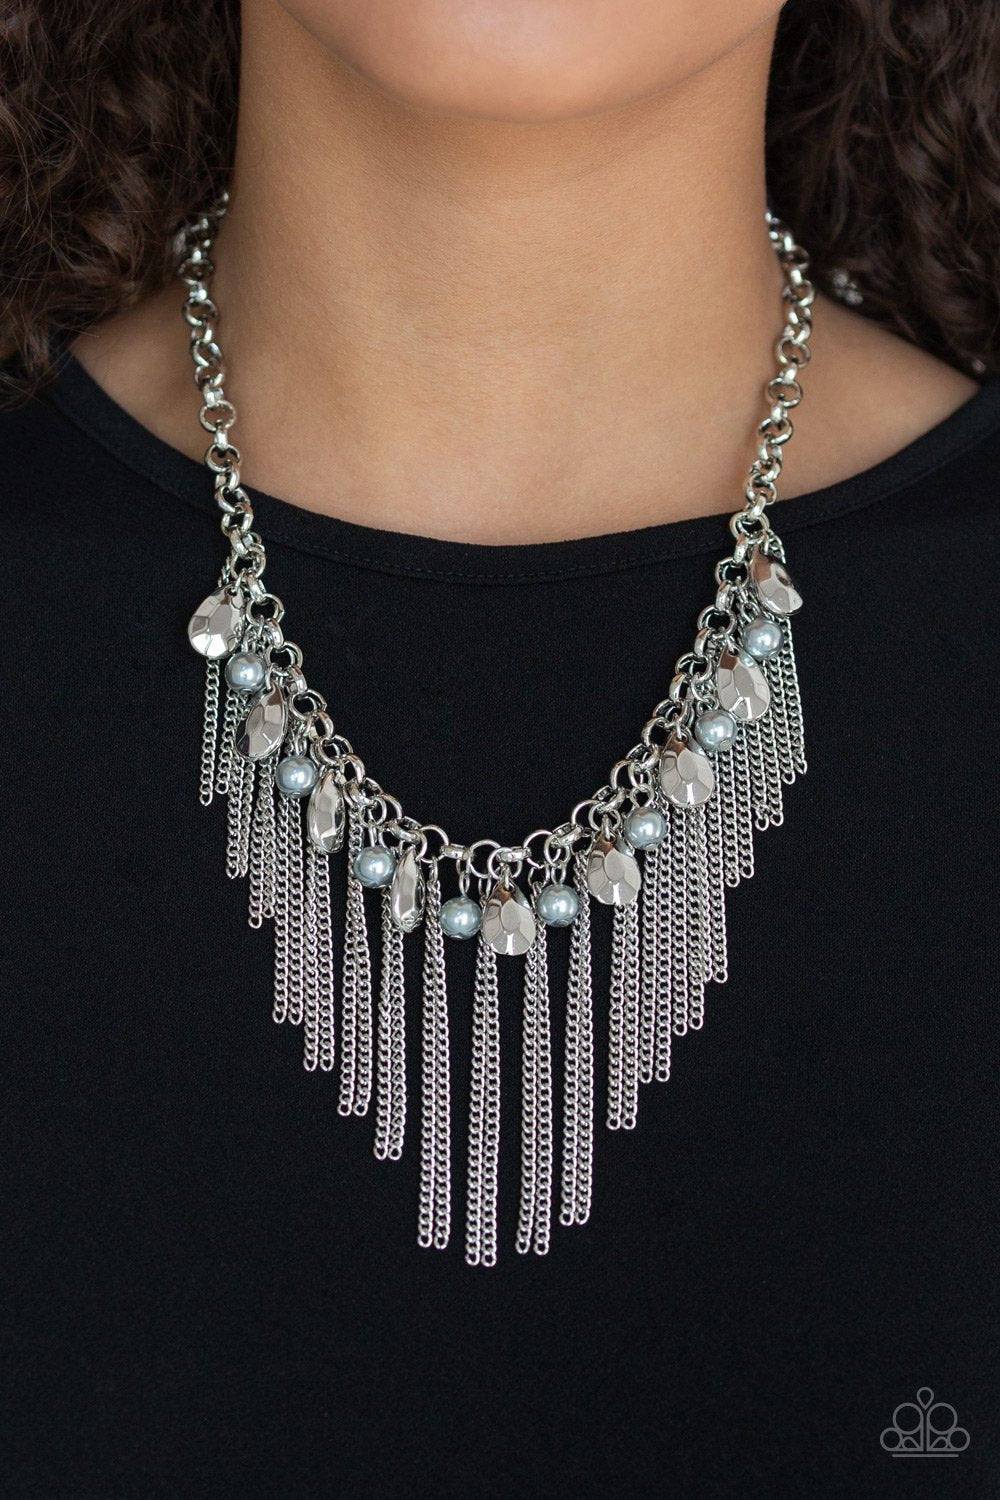 Industrial Intensity - silver - Paparazzi necklace